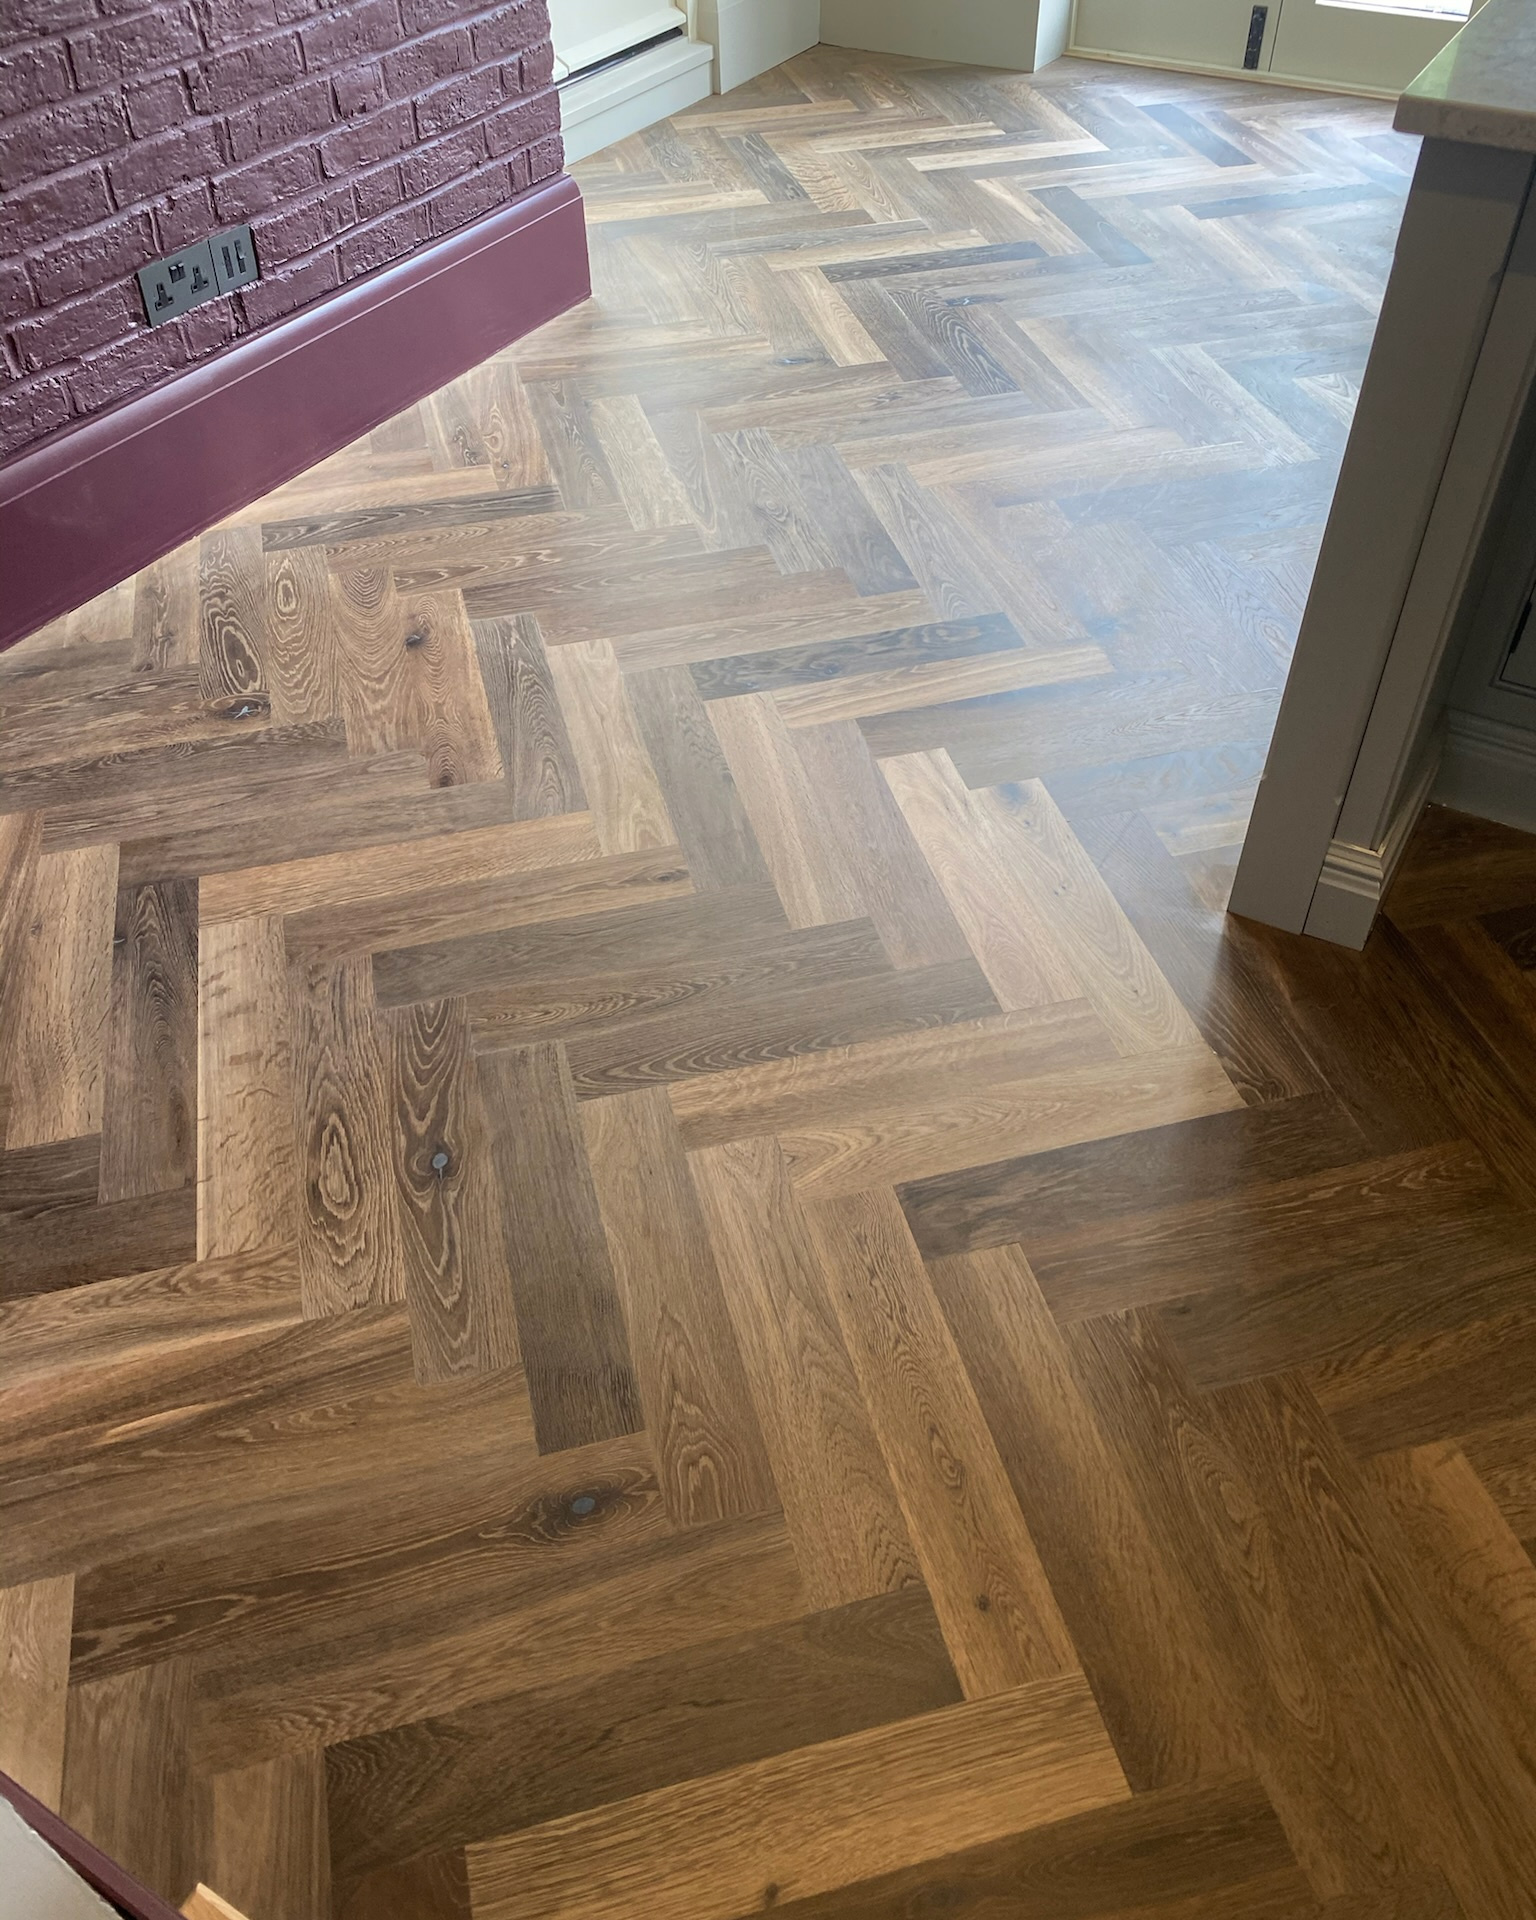 Image showing parquet flooring in a Tunbridge Wells home, restored by Mark Antony & Sons.